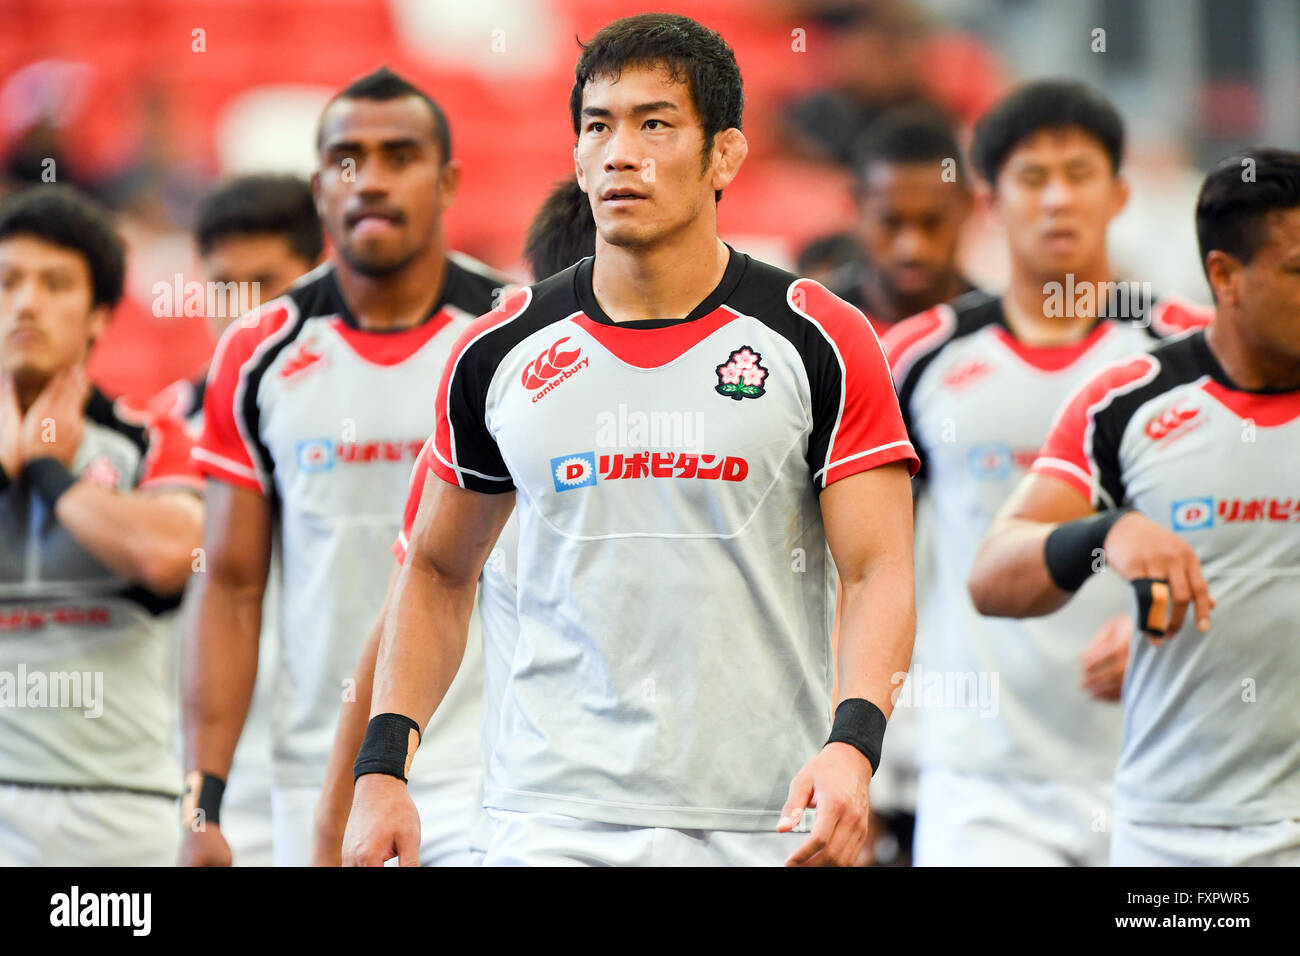 APRL 16, 2016 - Rugby : HSBC Sevens World Series, Singapore Sevens match Japan and Wales at National Stadium in Singapore. (Photo by Haruhiko Otsuka/AFLO) Stock Photo